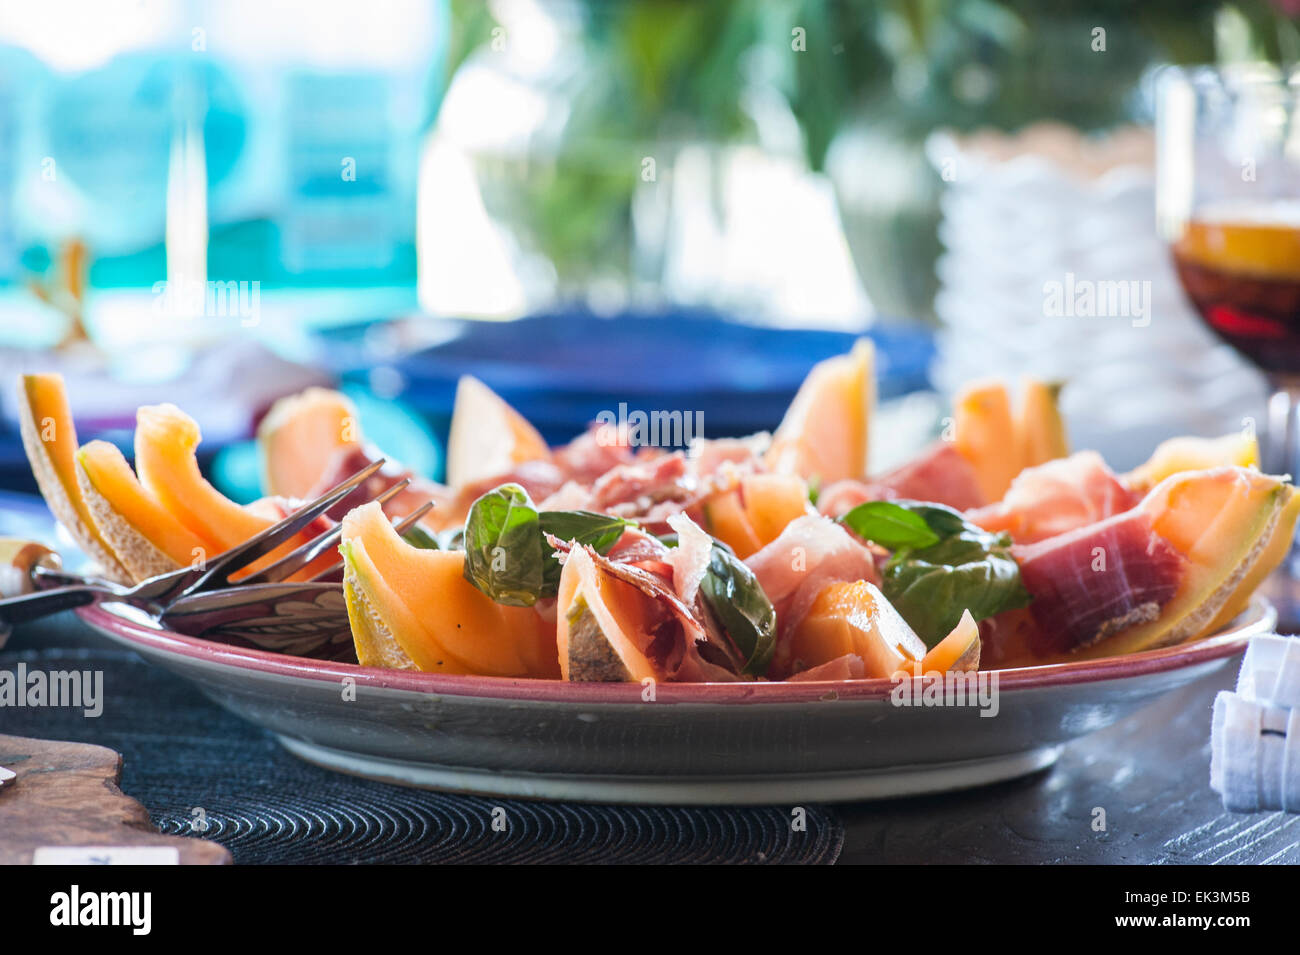 A Mediterranean style lunch outside Stock Photo